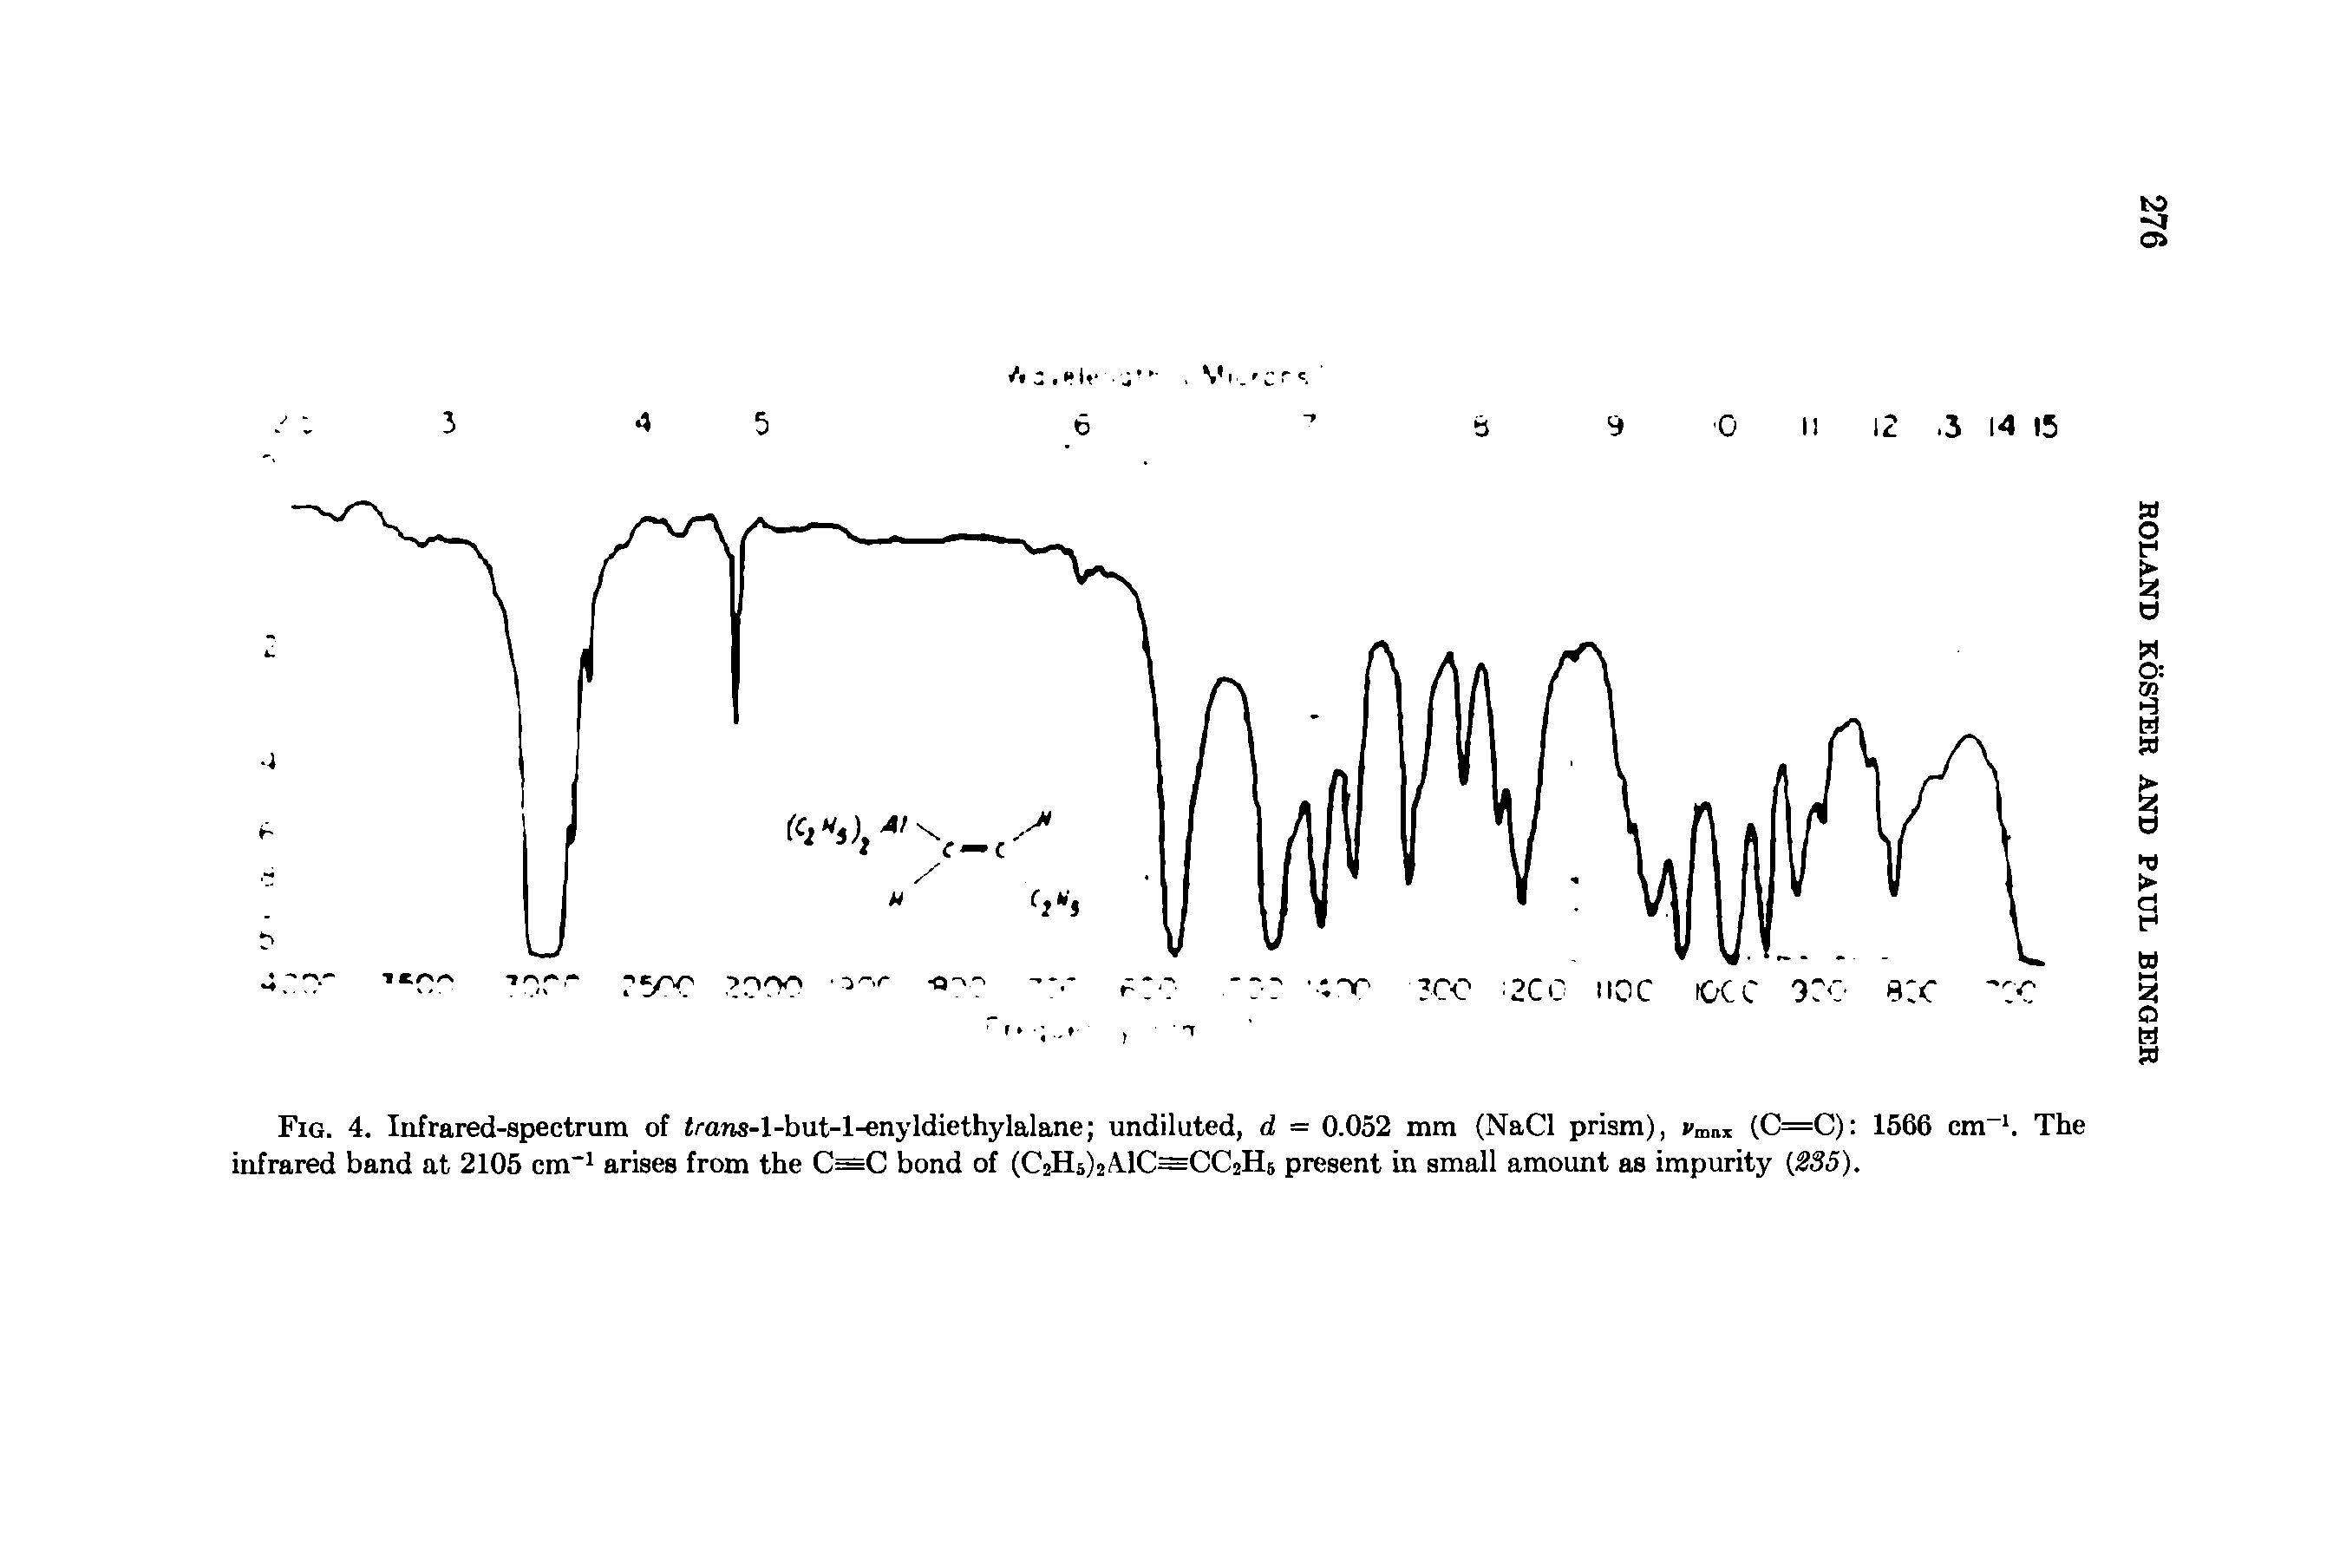 Fig. 4. Infrared-spectrum of <rans-l-but-l-enyldiethylalane undiluted, d = 0.052 mm (NaCl prism), >m i (C=C) 1566 cm. The infrared band at 2105 cm"1 arises from the C=C bond of (CoHs MC CCoHs present in small amount as impurity 235).